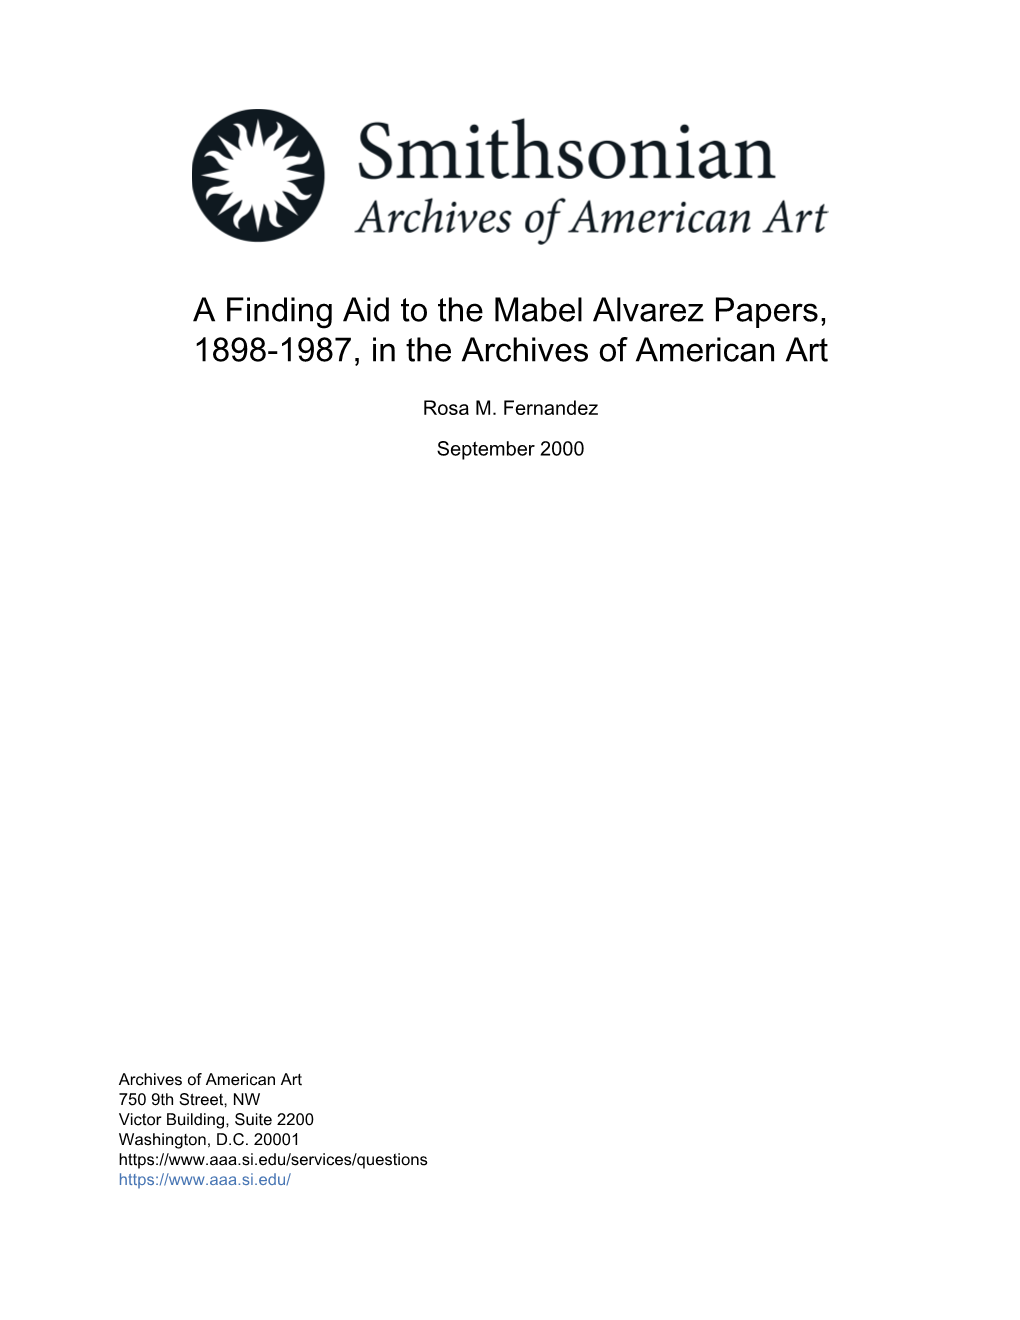 A Finding Aid to the Mabel Alvarez Papers, 1898-1987, in the Archives of American Art